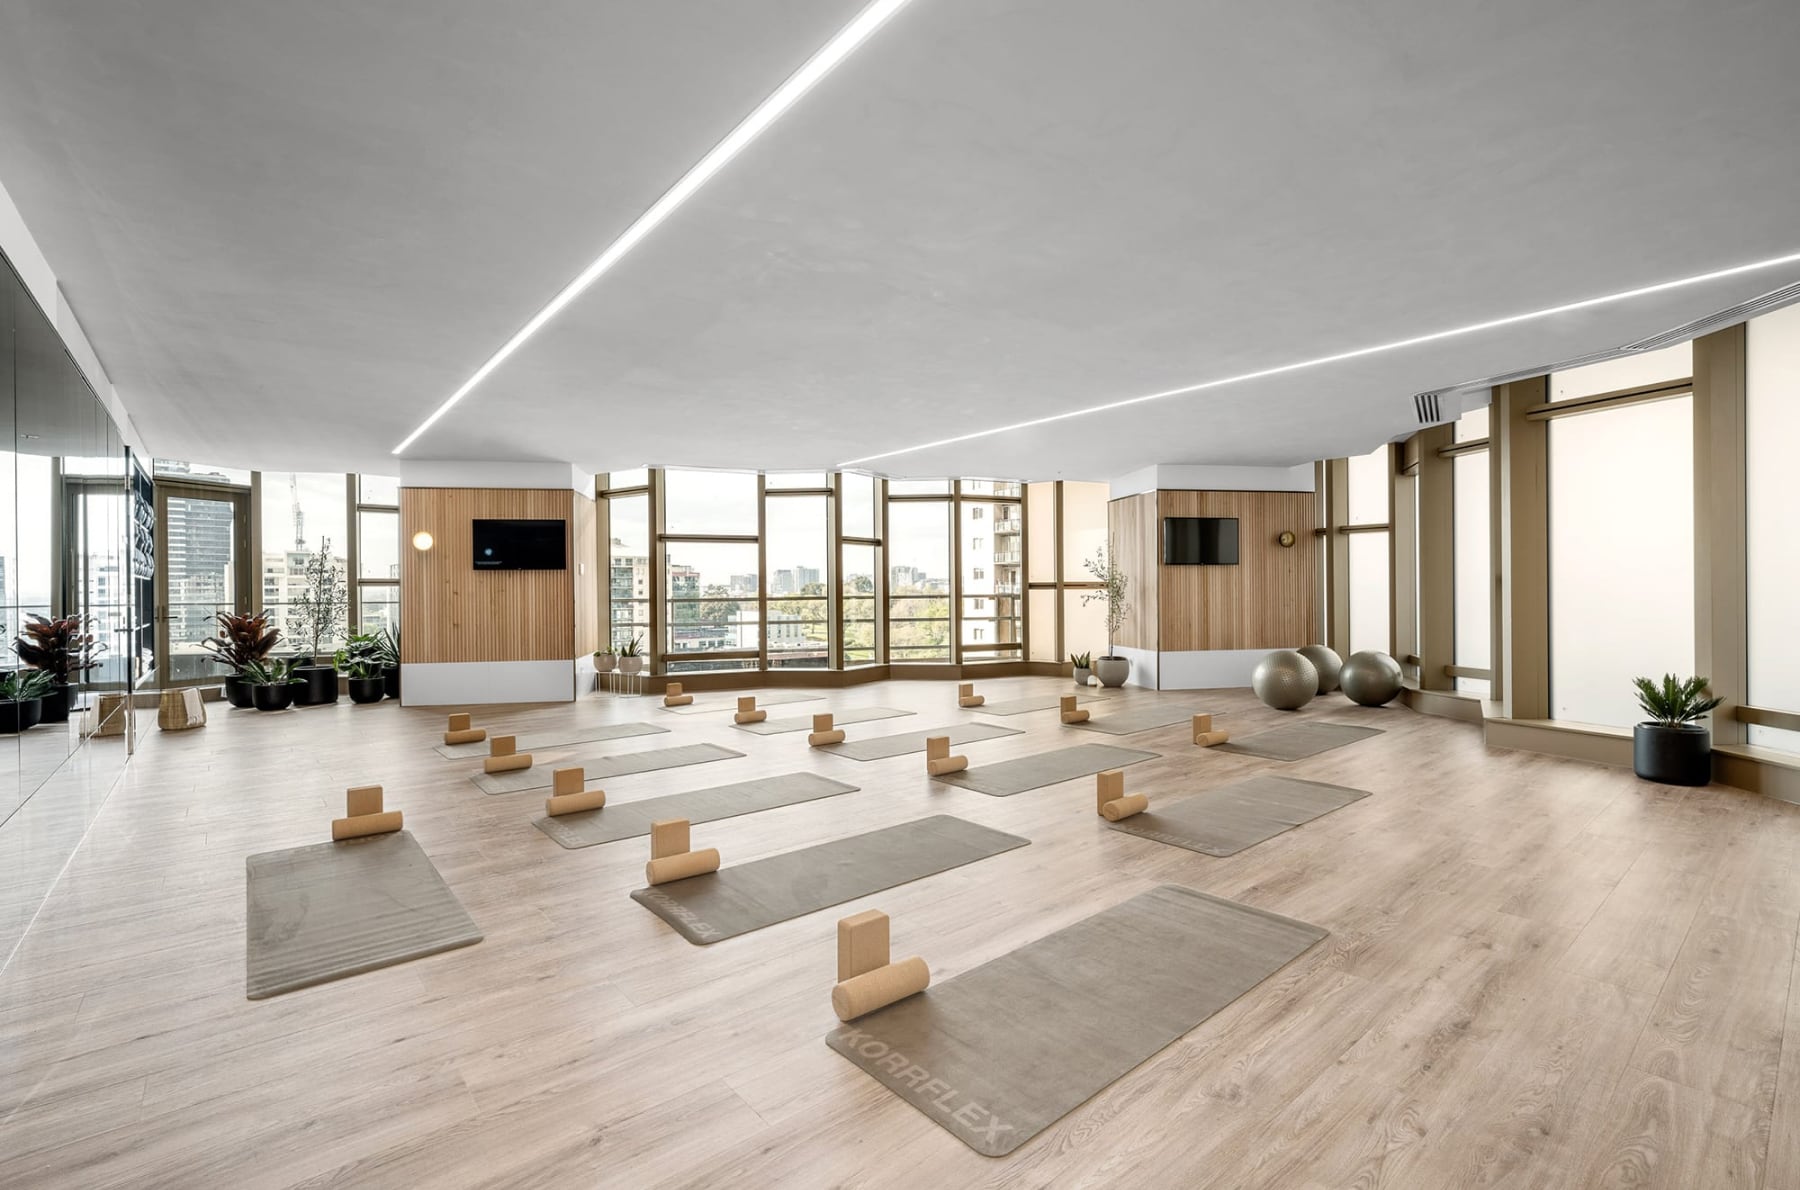 A gymnasium and wellness centre with yoga and Pilates equipment